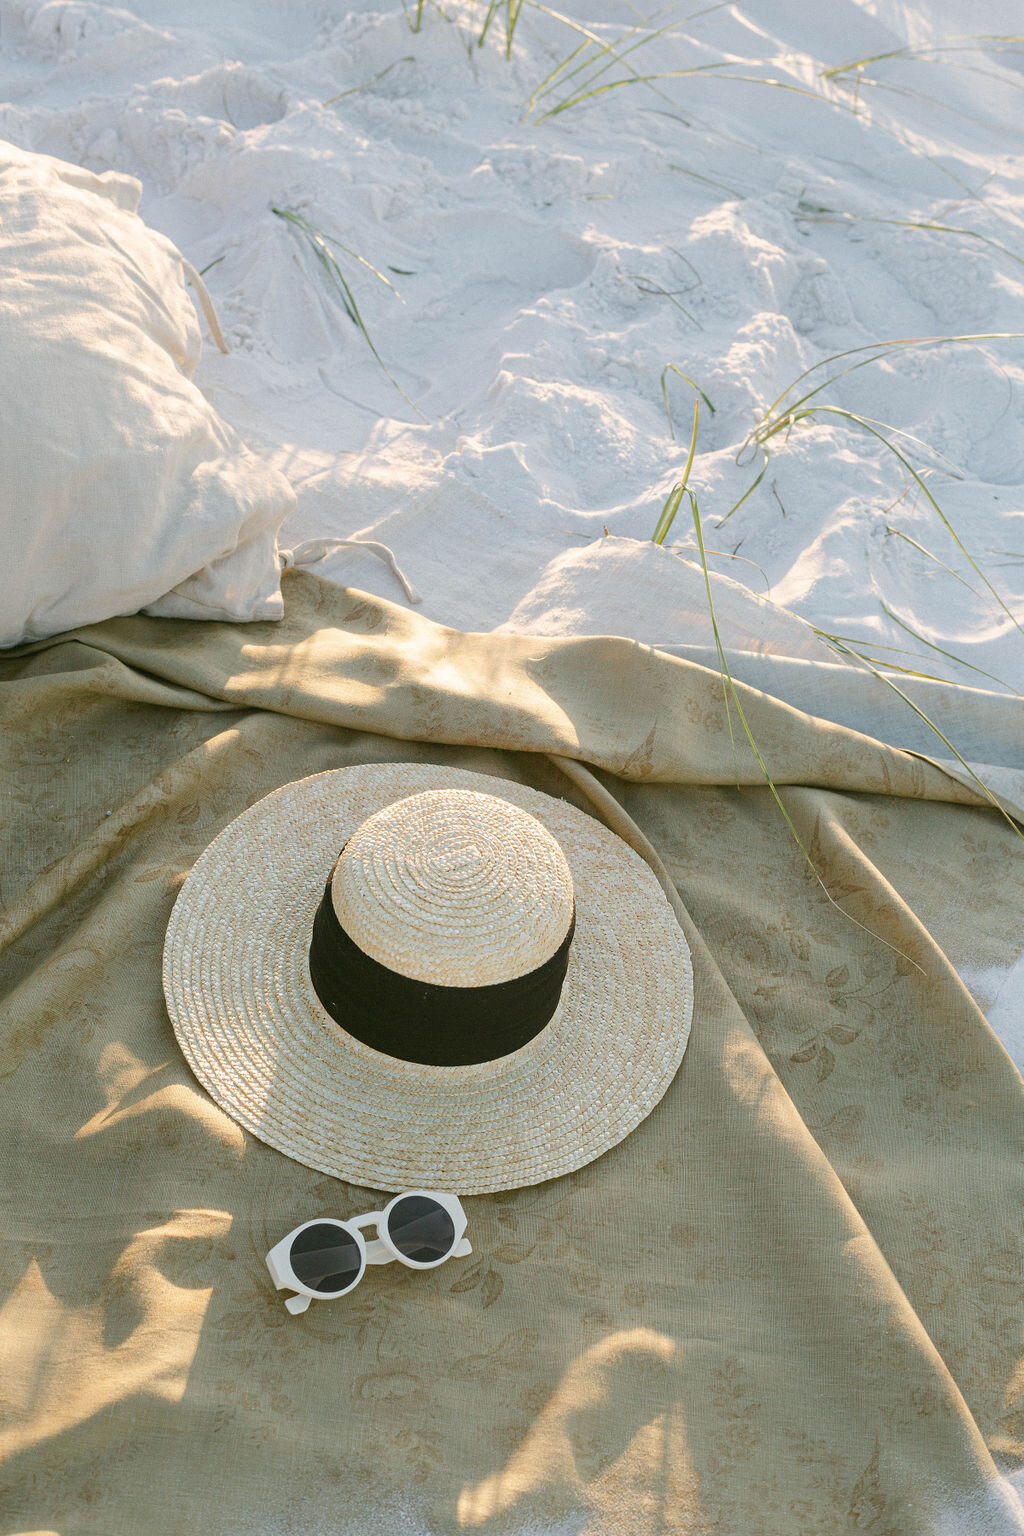 white Tol sunglasses and hat on a beige blanket.